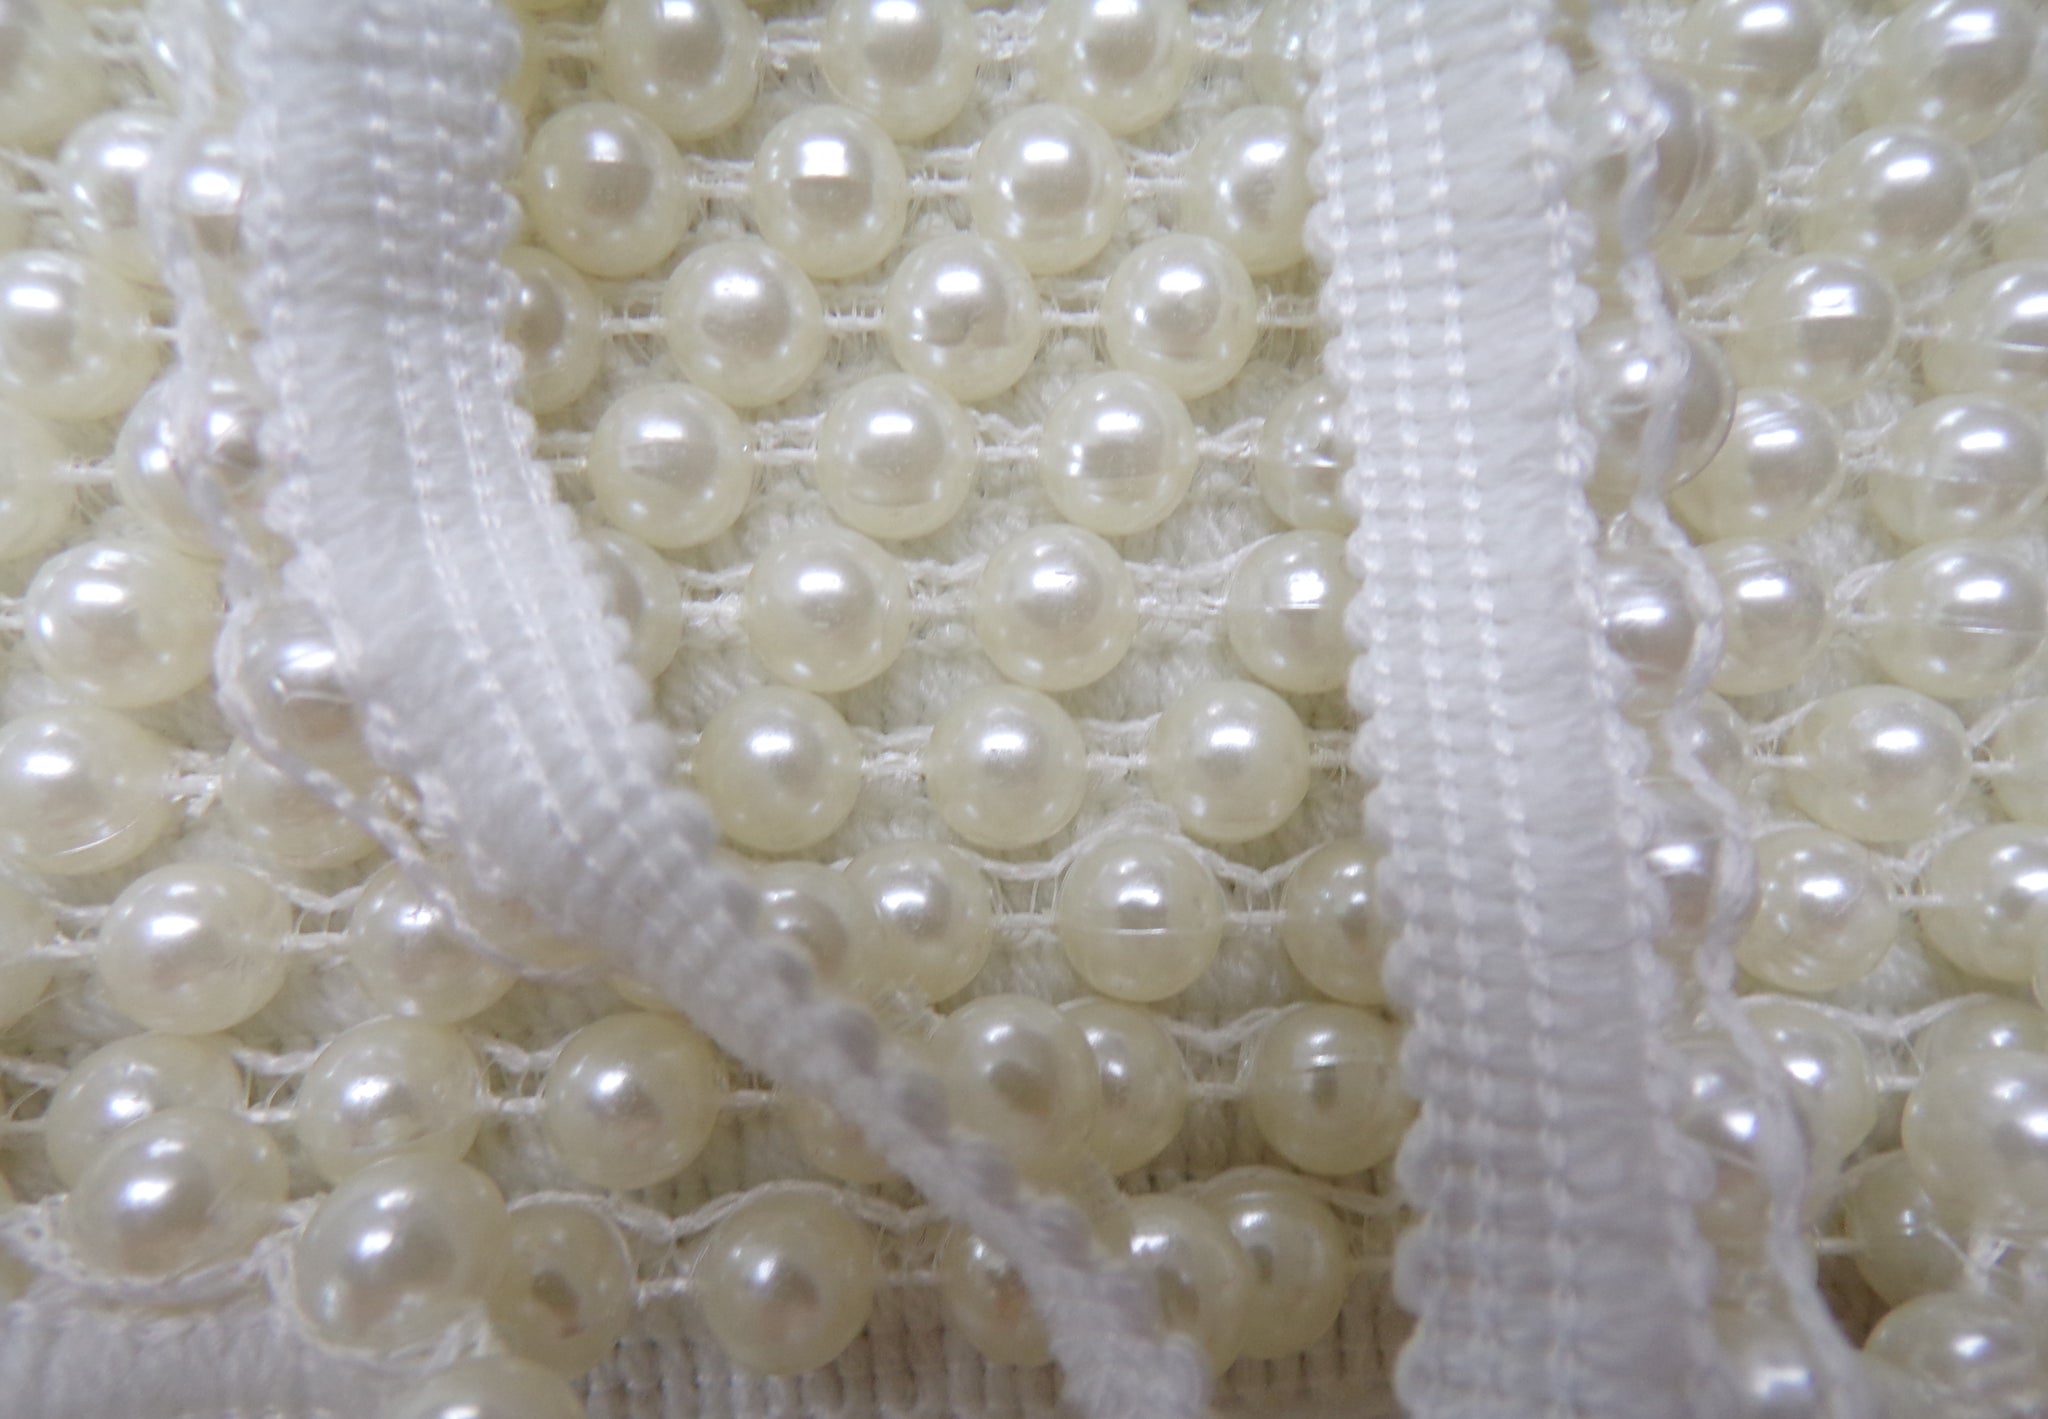 3-Yards 4mm White Pearl Beaded Trim with Bias Tape for Wedding Decoration, Home Decor, Craft Projects, SP-2786